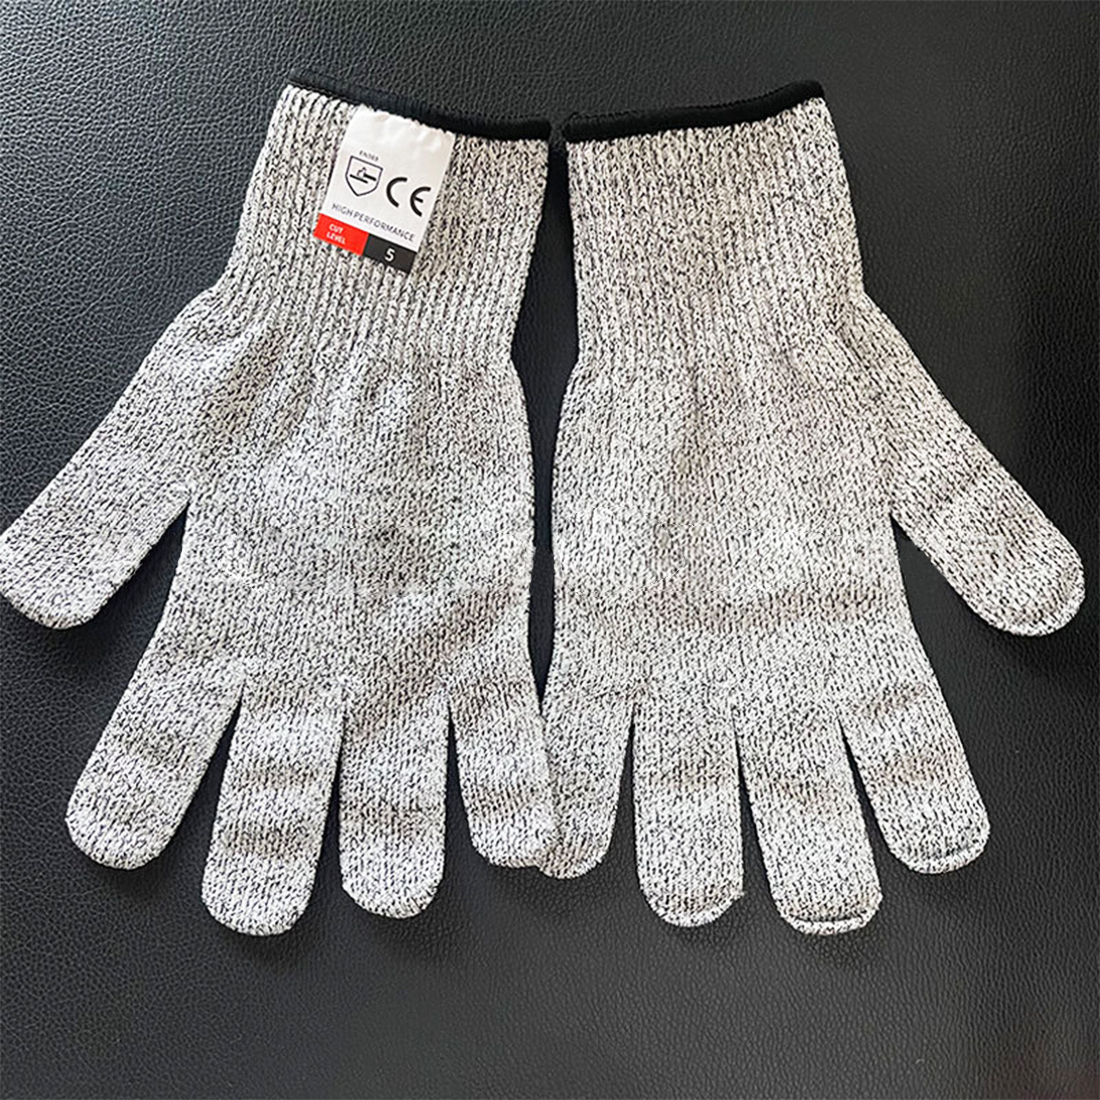 Safety Gloves Cut Resistant - anti-cut Working Hand Gloves